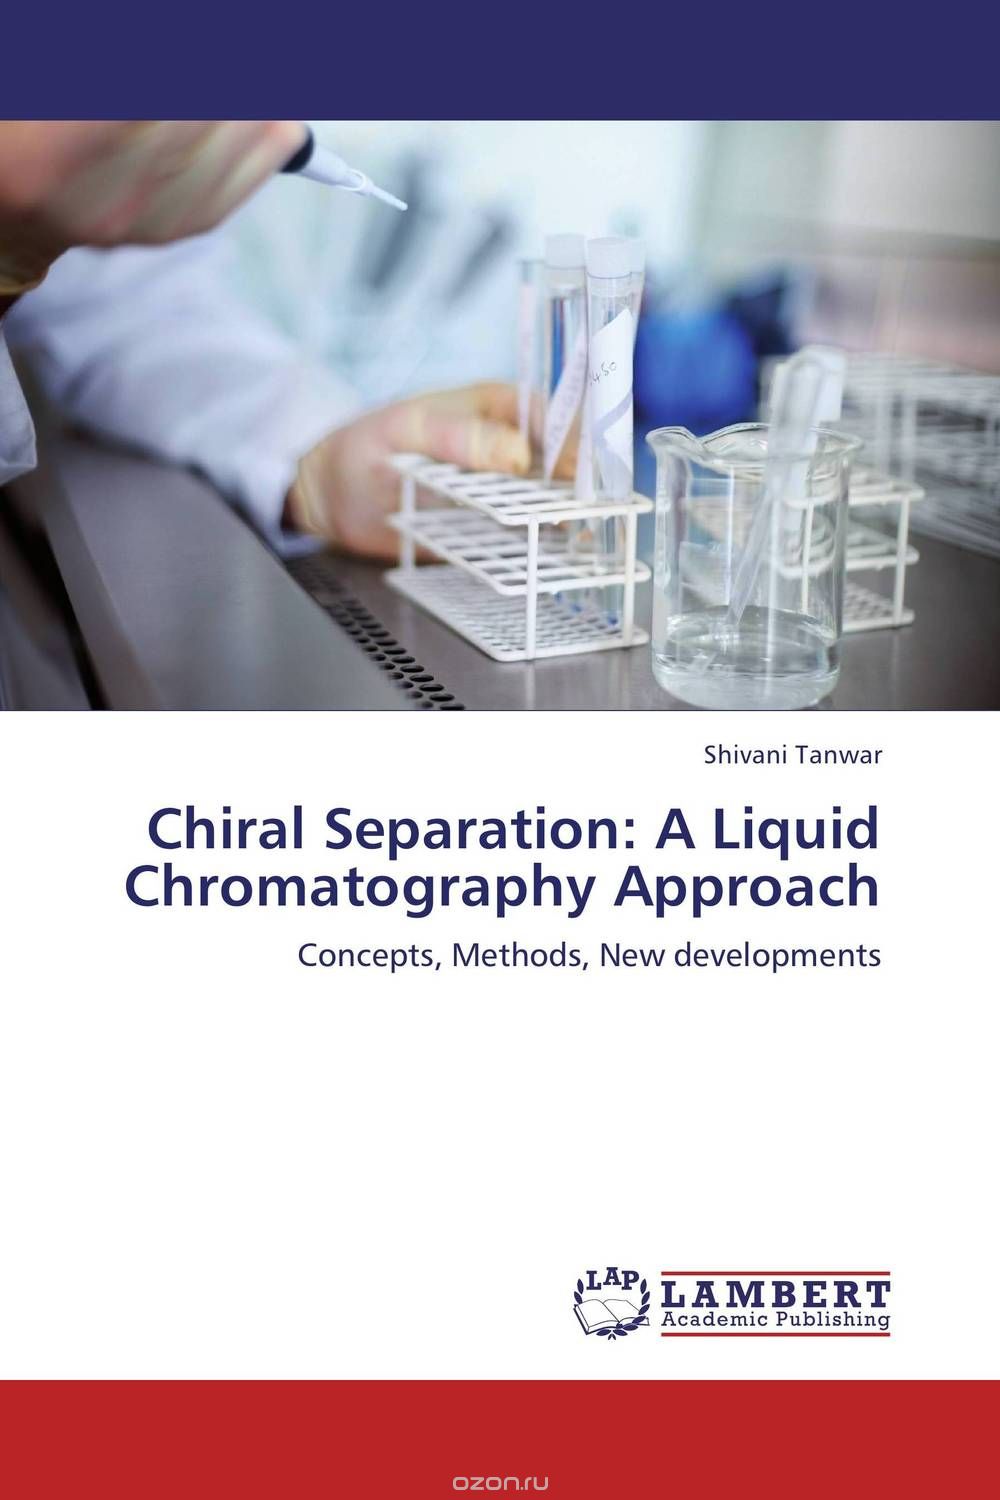 Chiral Separation: A Liquid Chromatography Approach